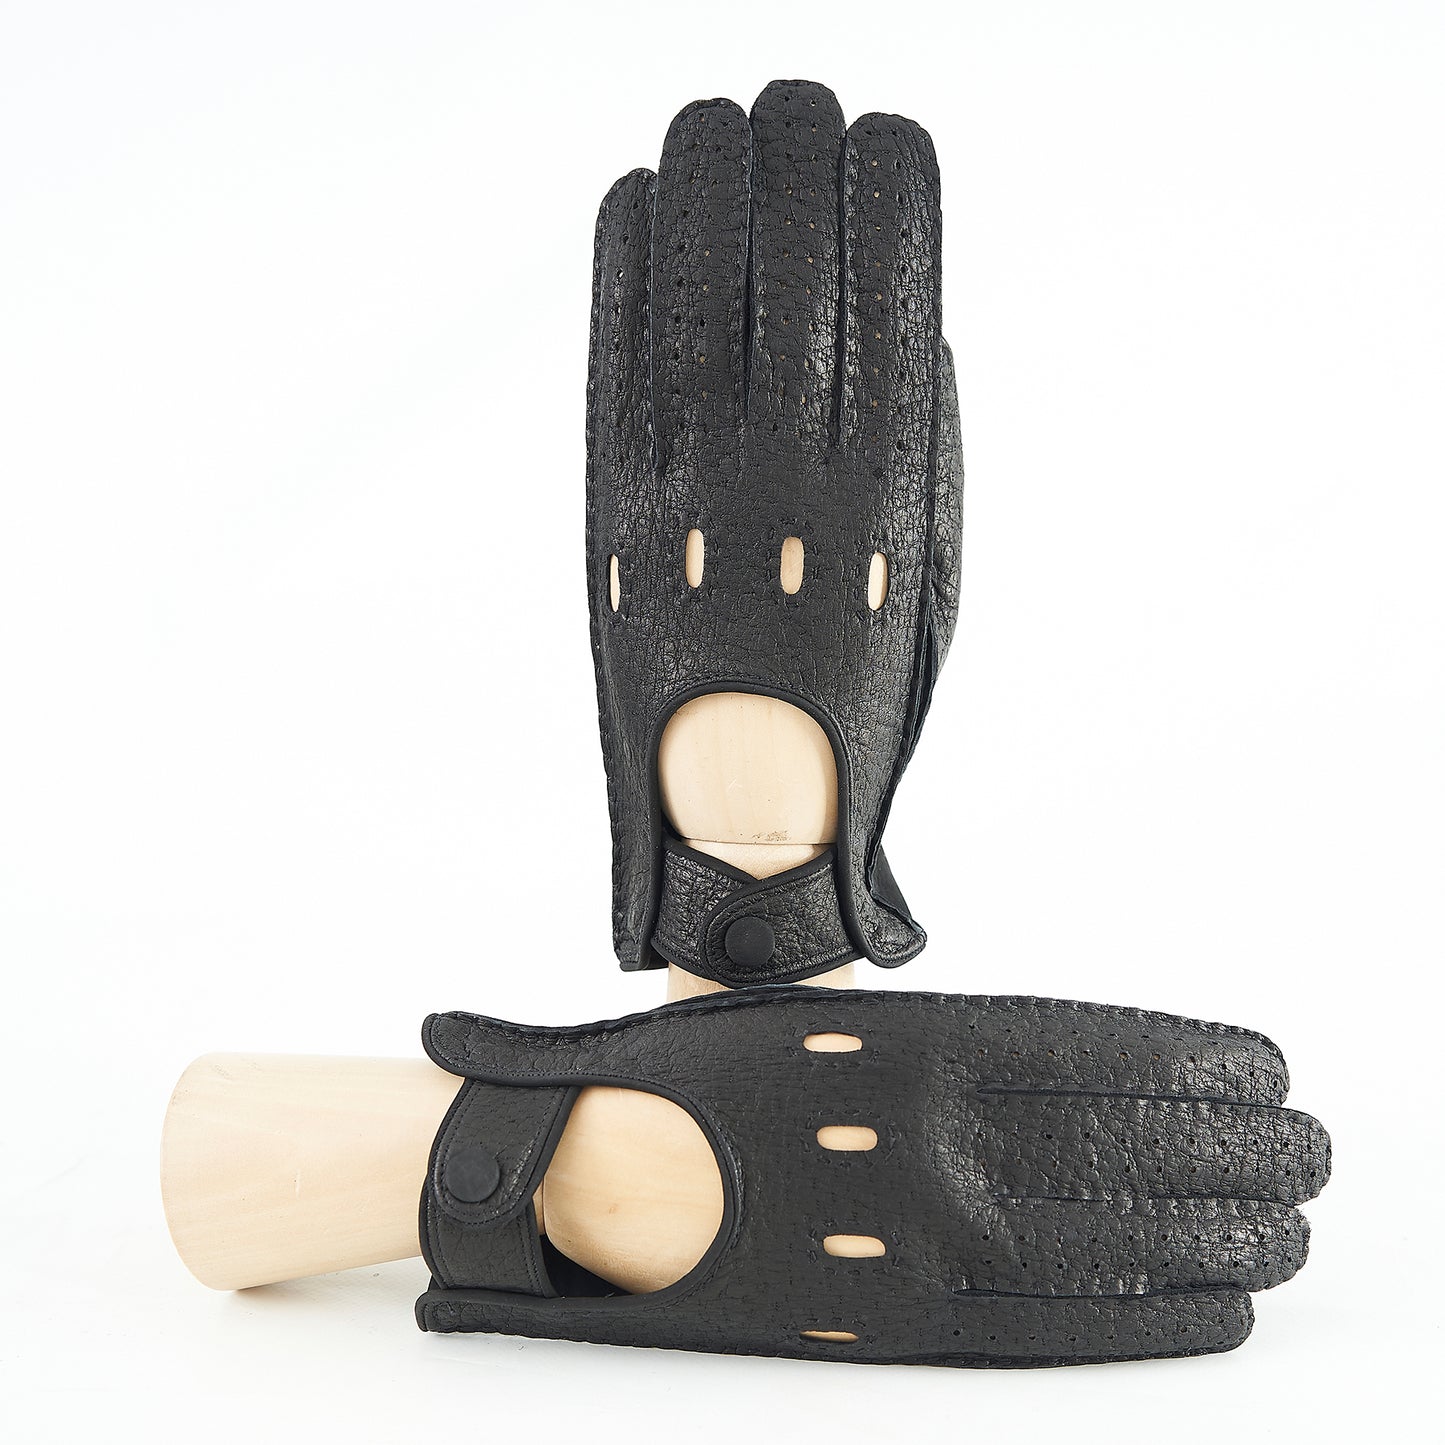 Men's unlined black peccary leather driving gloves with suede palm and button closure